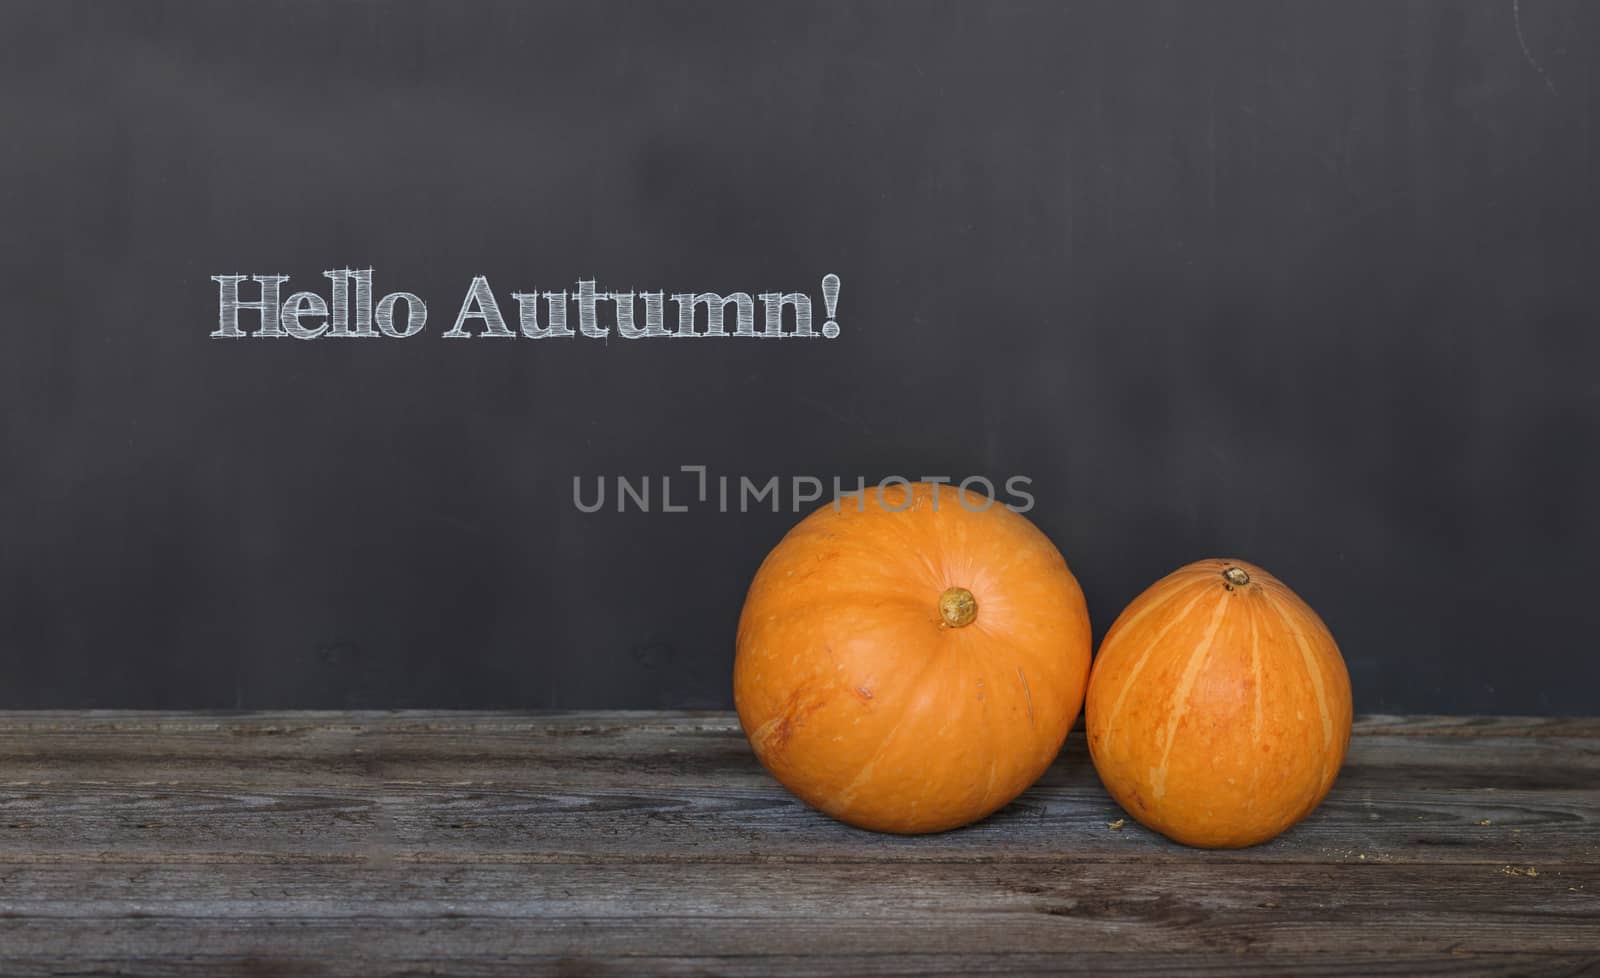 Hello Autumn greeting text with colorful pumpkins Blackboard background by galinasharapova